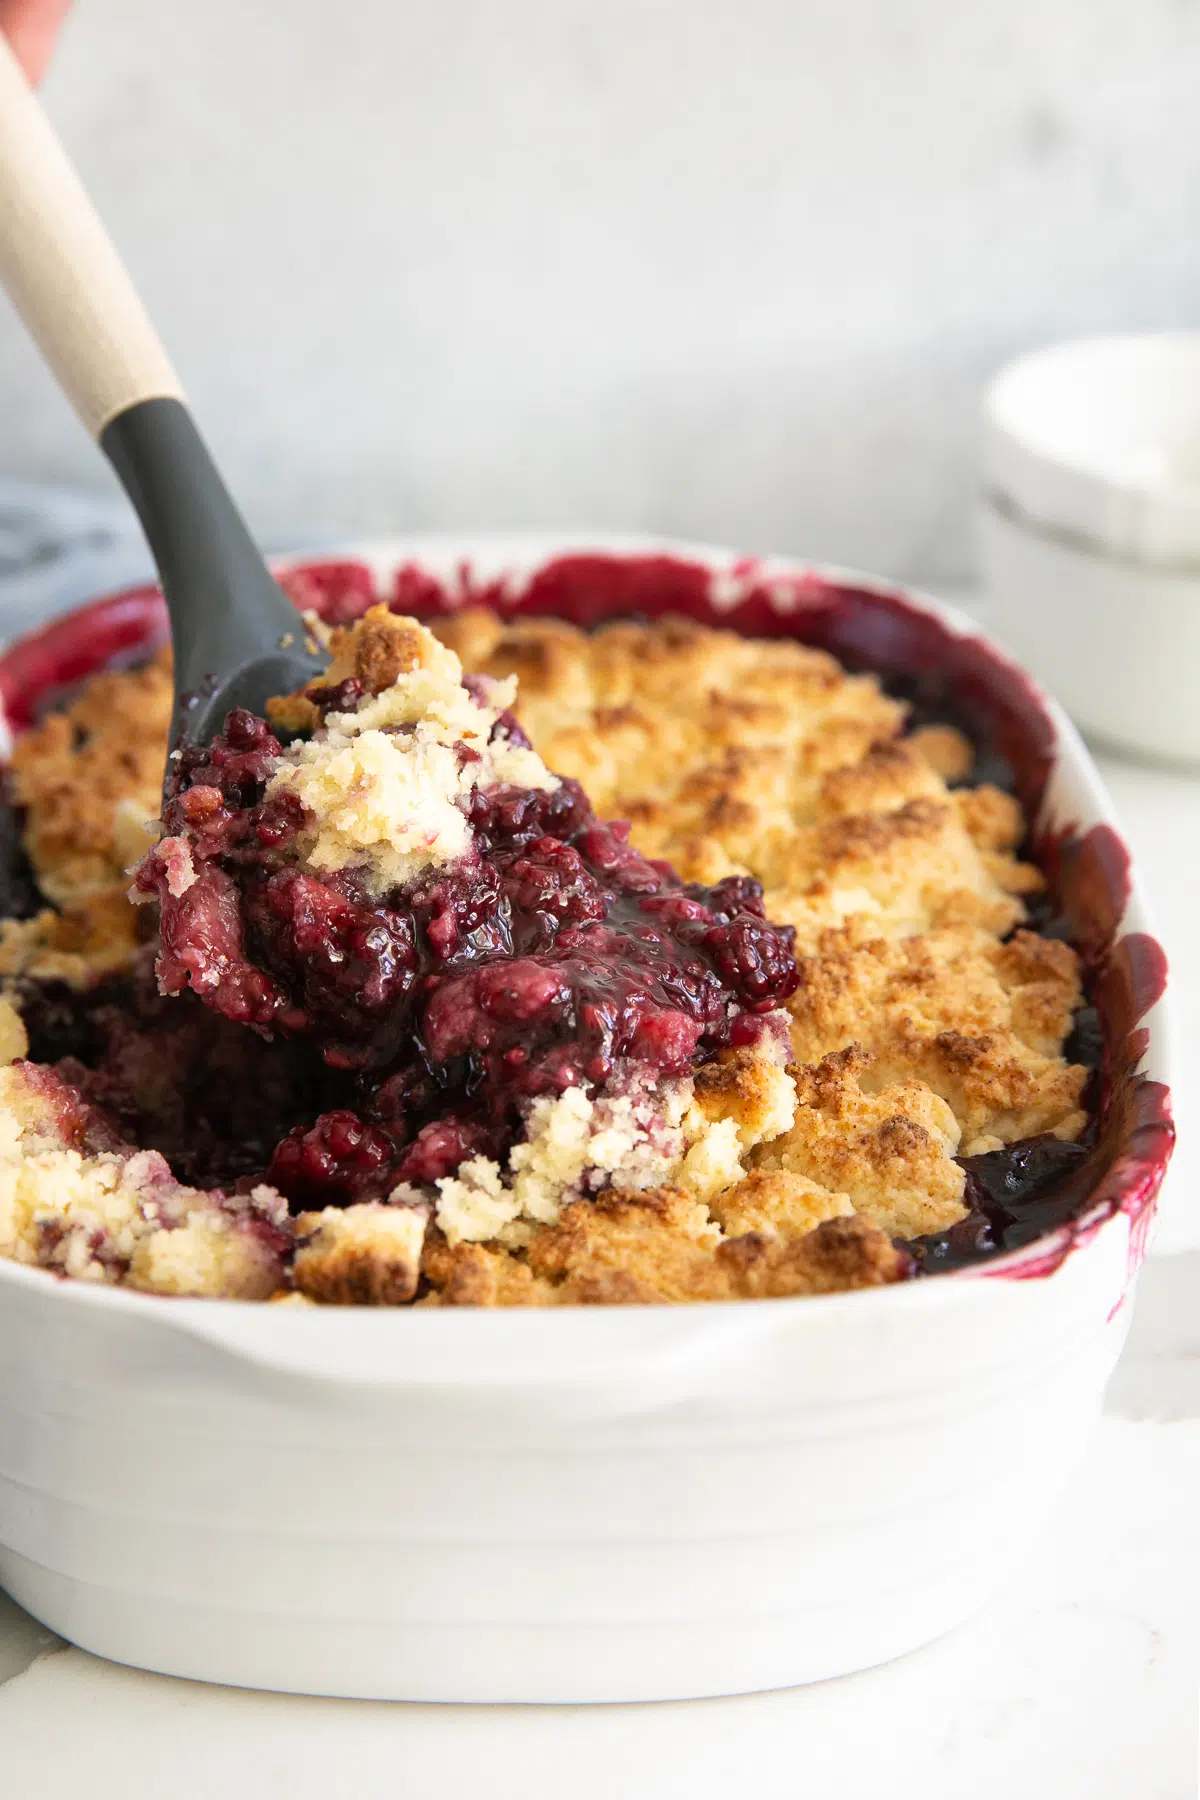 Spatula scooping hot blackberry cobbler from a white baking dish.